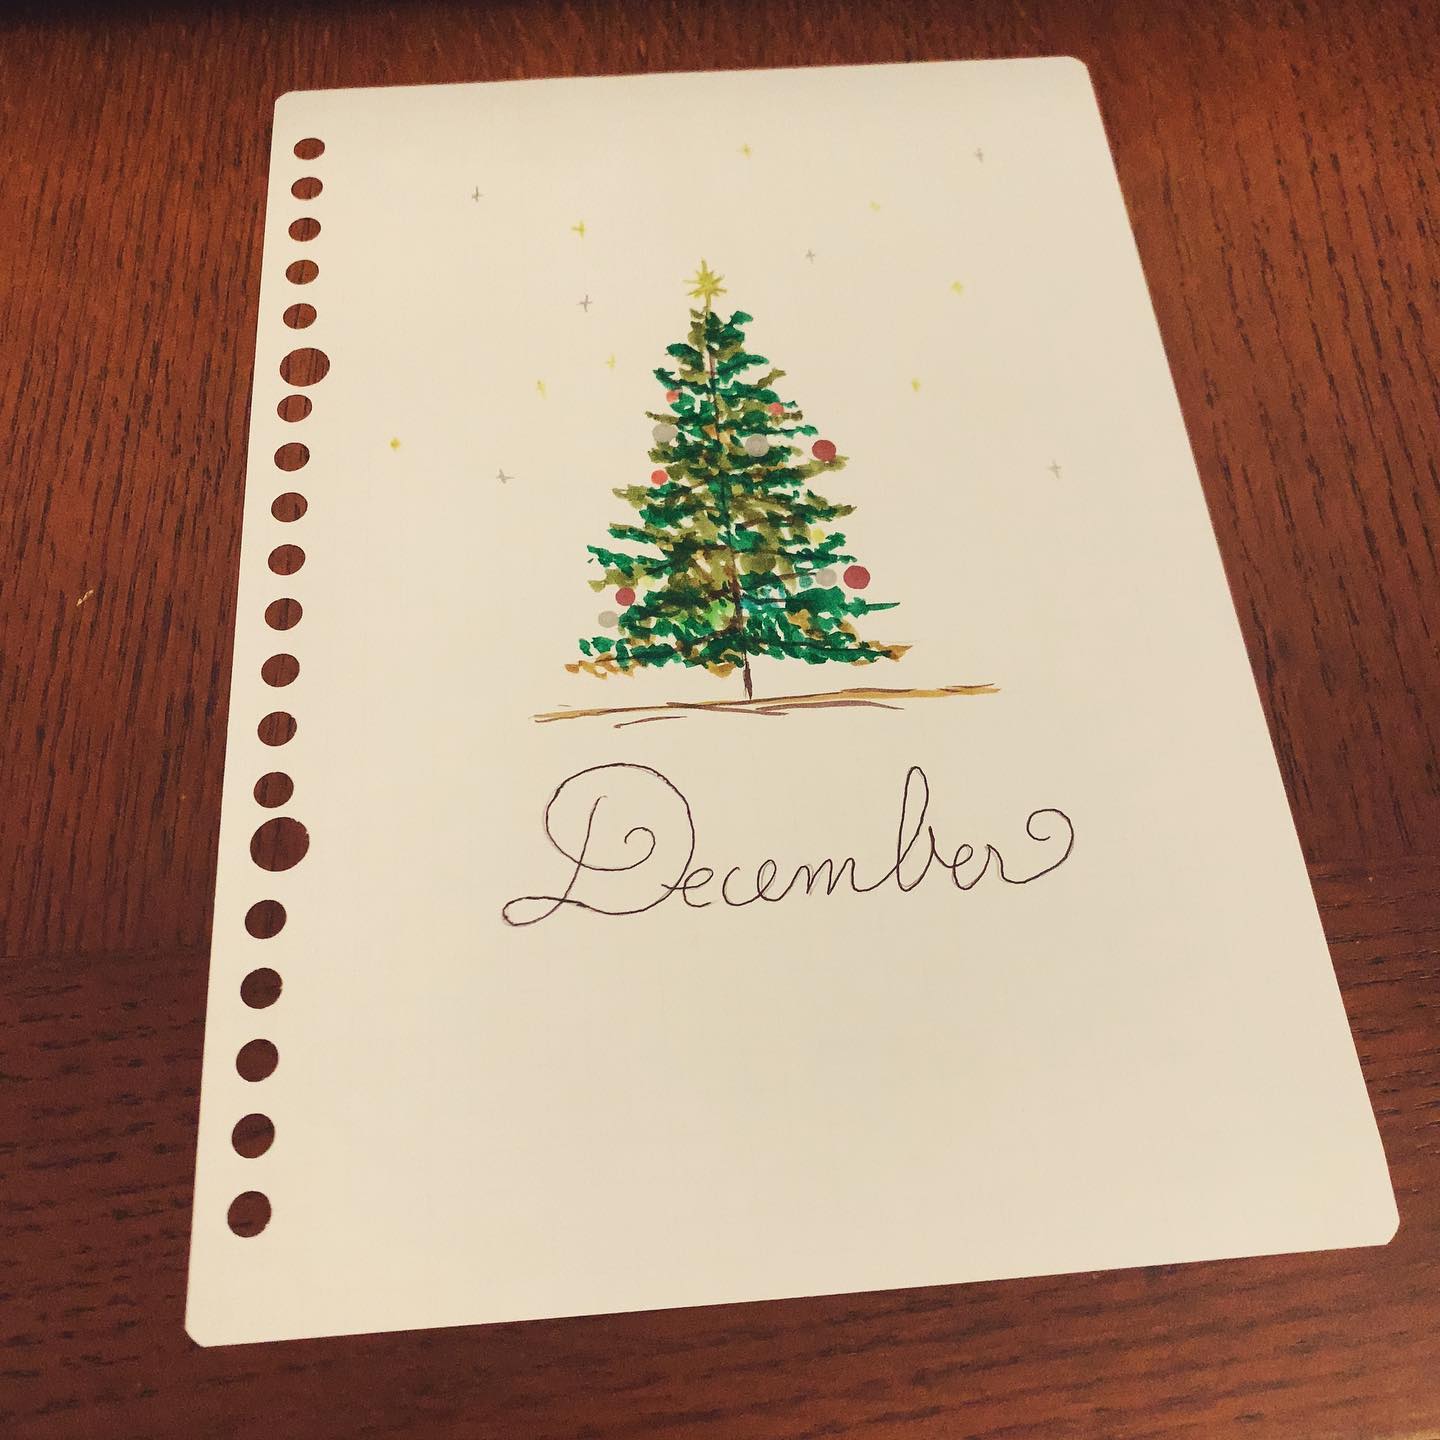 I'm a little late, but I wrote the December door page 🚪.
I'm going to write my goals in the empty space below later.

I wish for many good things!

#バレットジャーナル #簡単 #bulletjournal